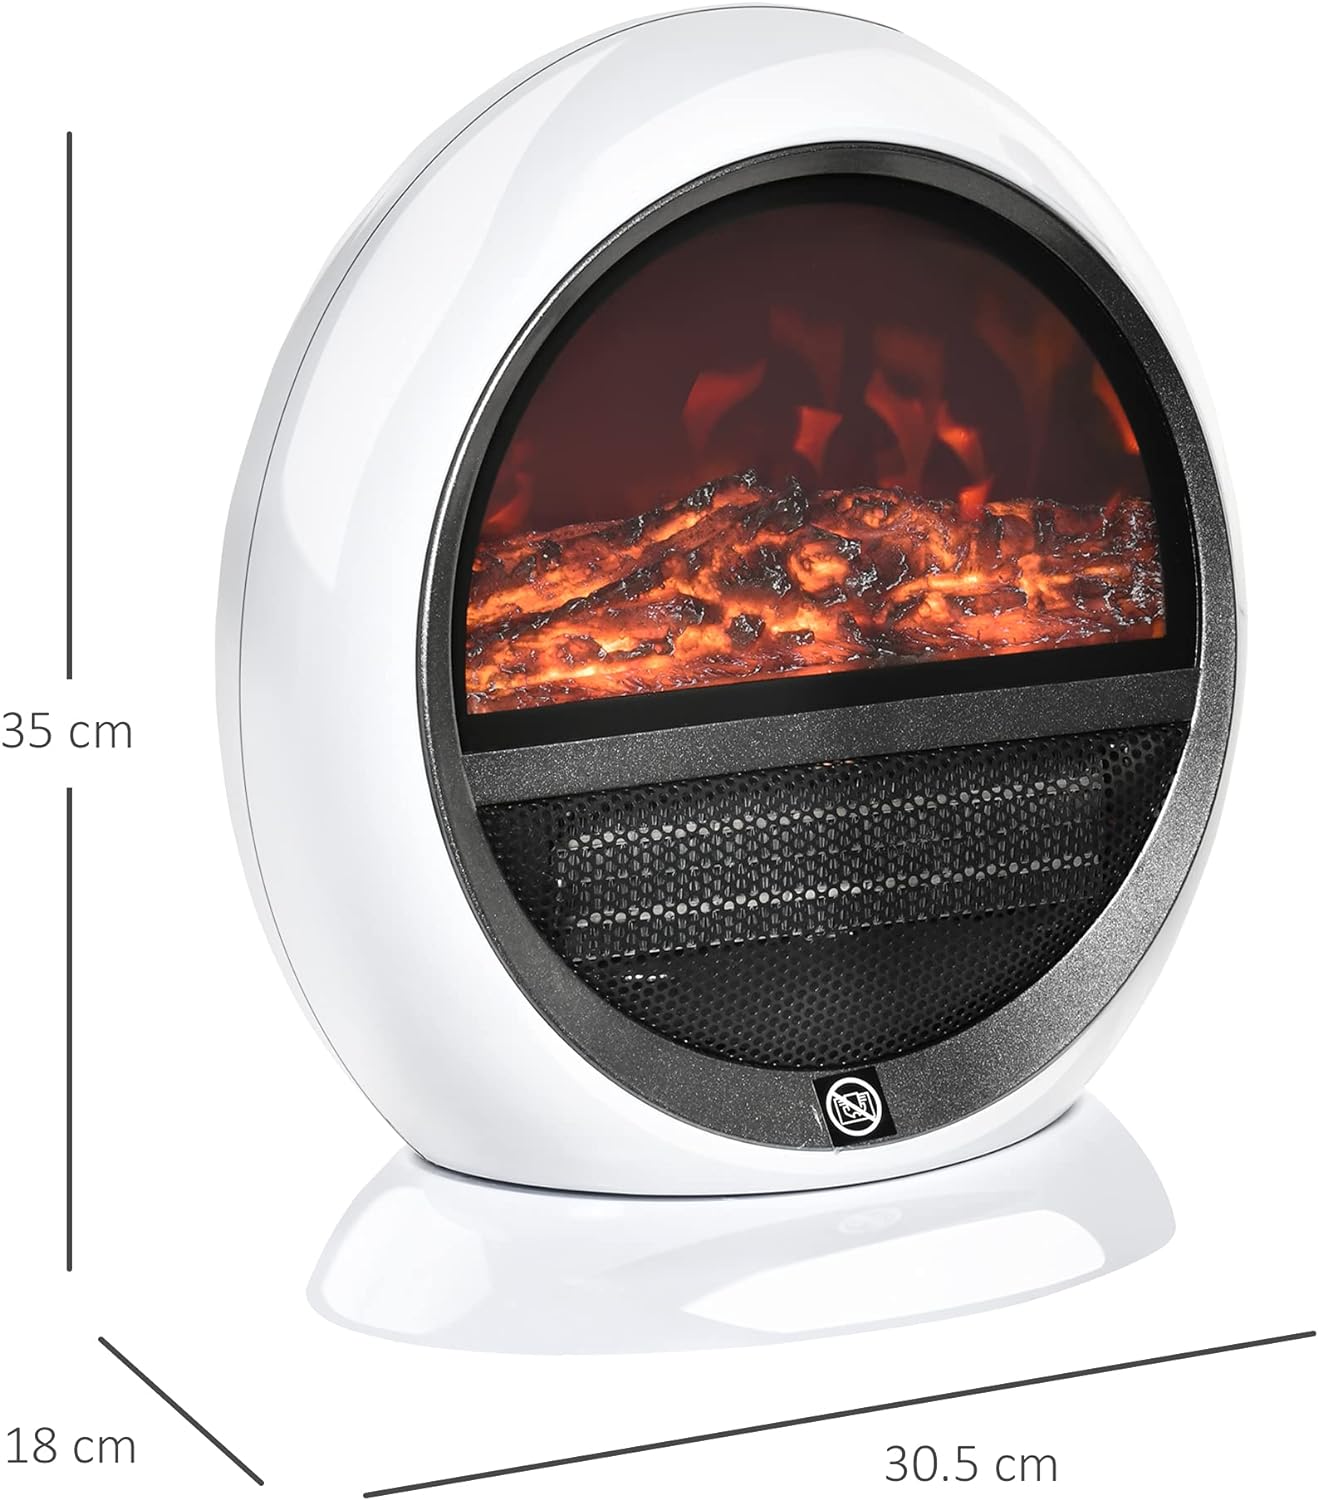 Maplin Plus 1500W Freestanding Electric Fireplace Heater with Flame Effect & Rotatable Head - maplin.co.uk